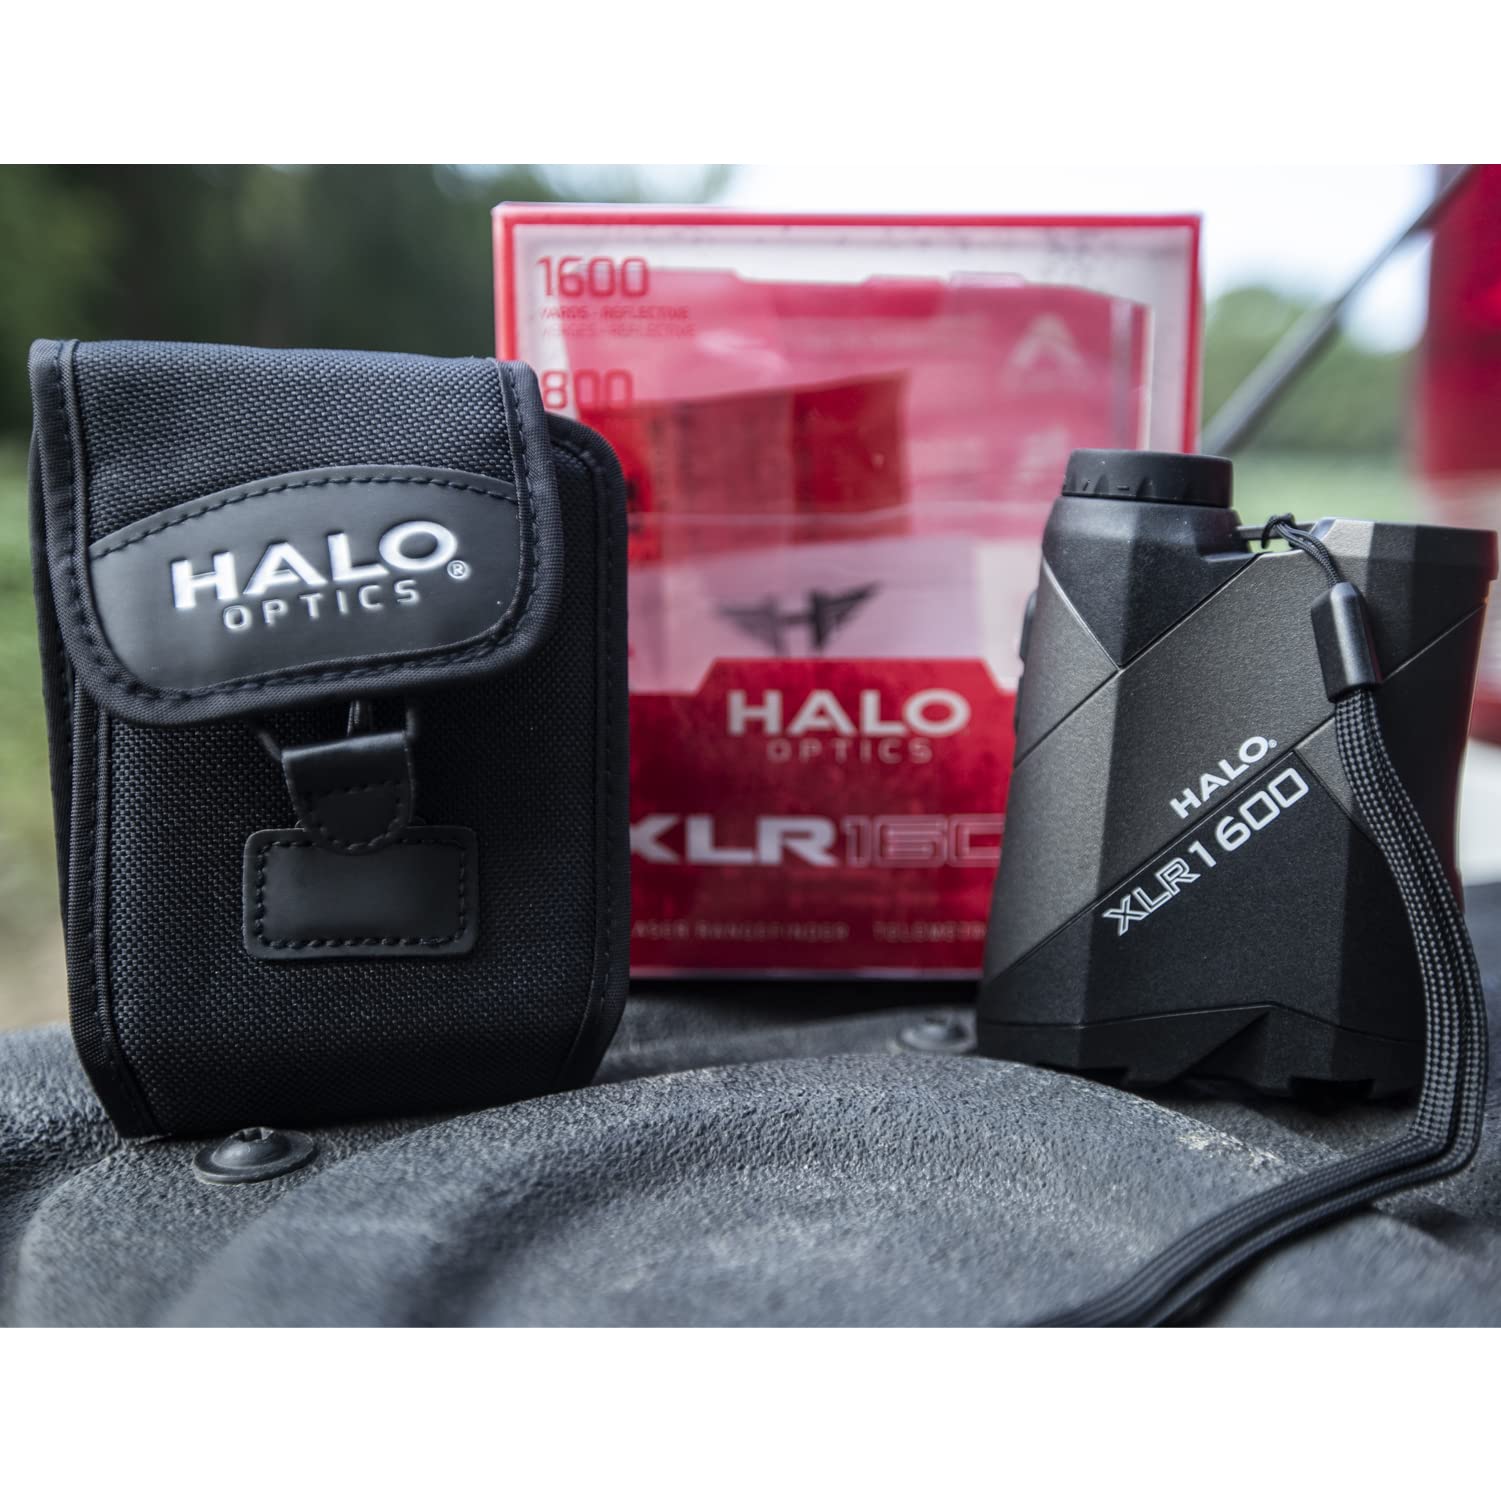 Halo Optics Accurate Precise Water-Resistant Ergonomic Non-Slip Grip Portable Durable Hunting Laser Range Finder with Scan Mode